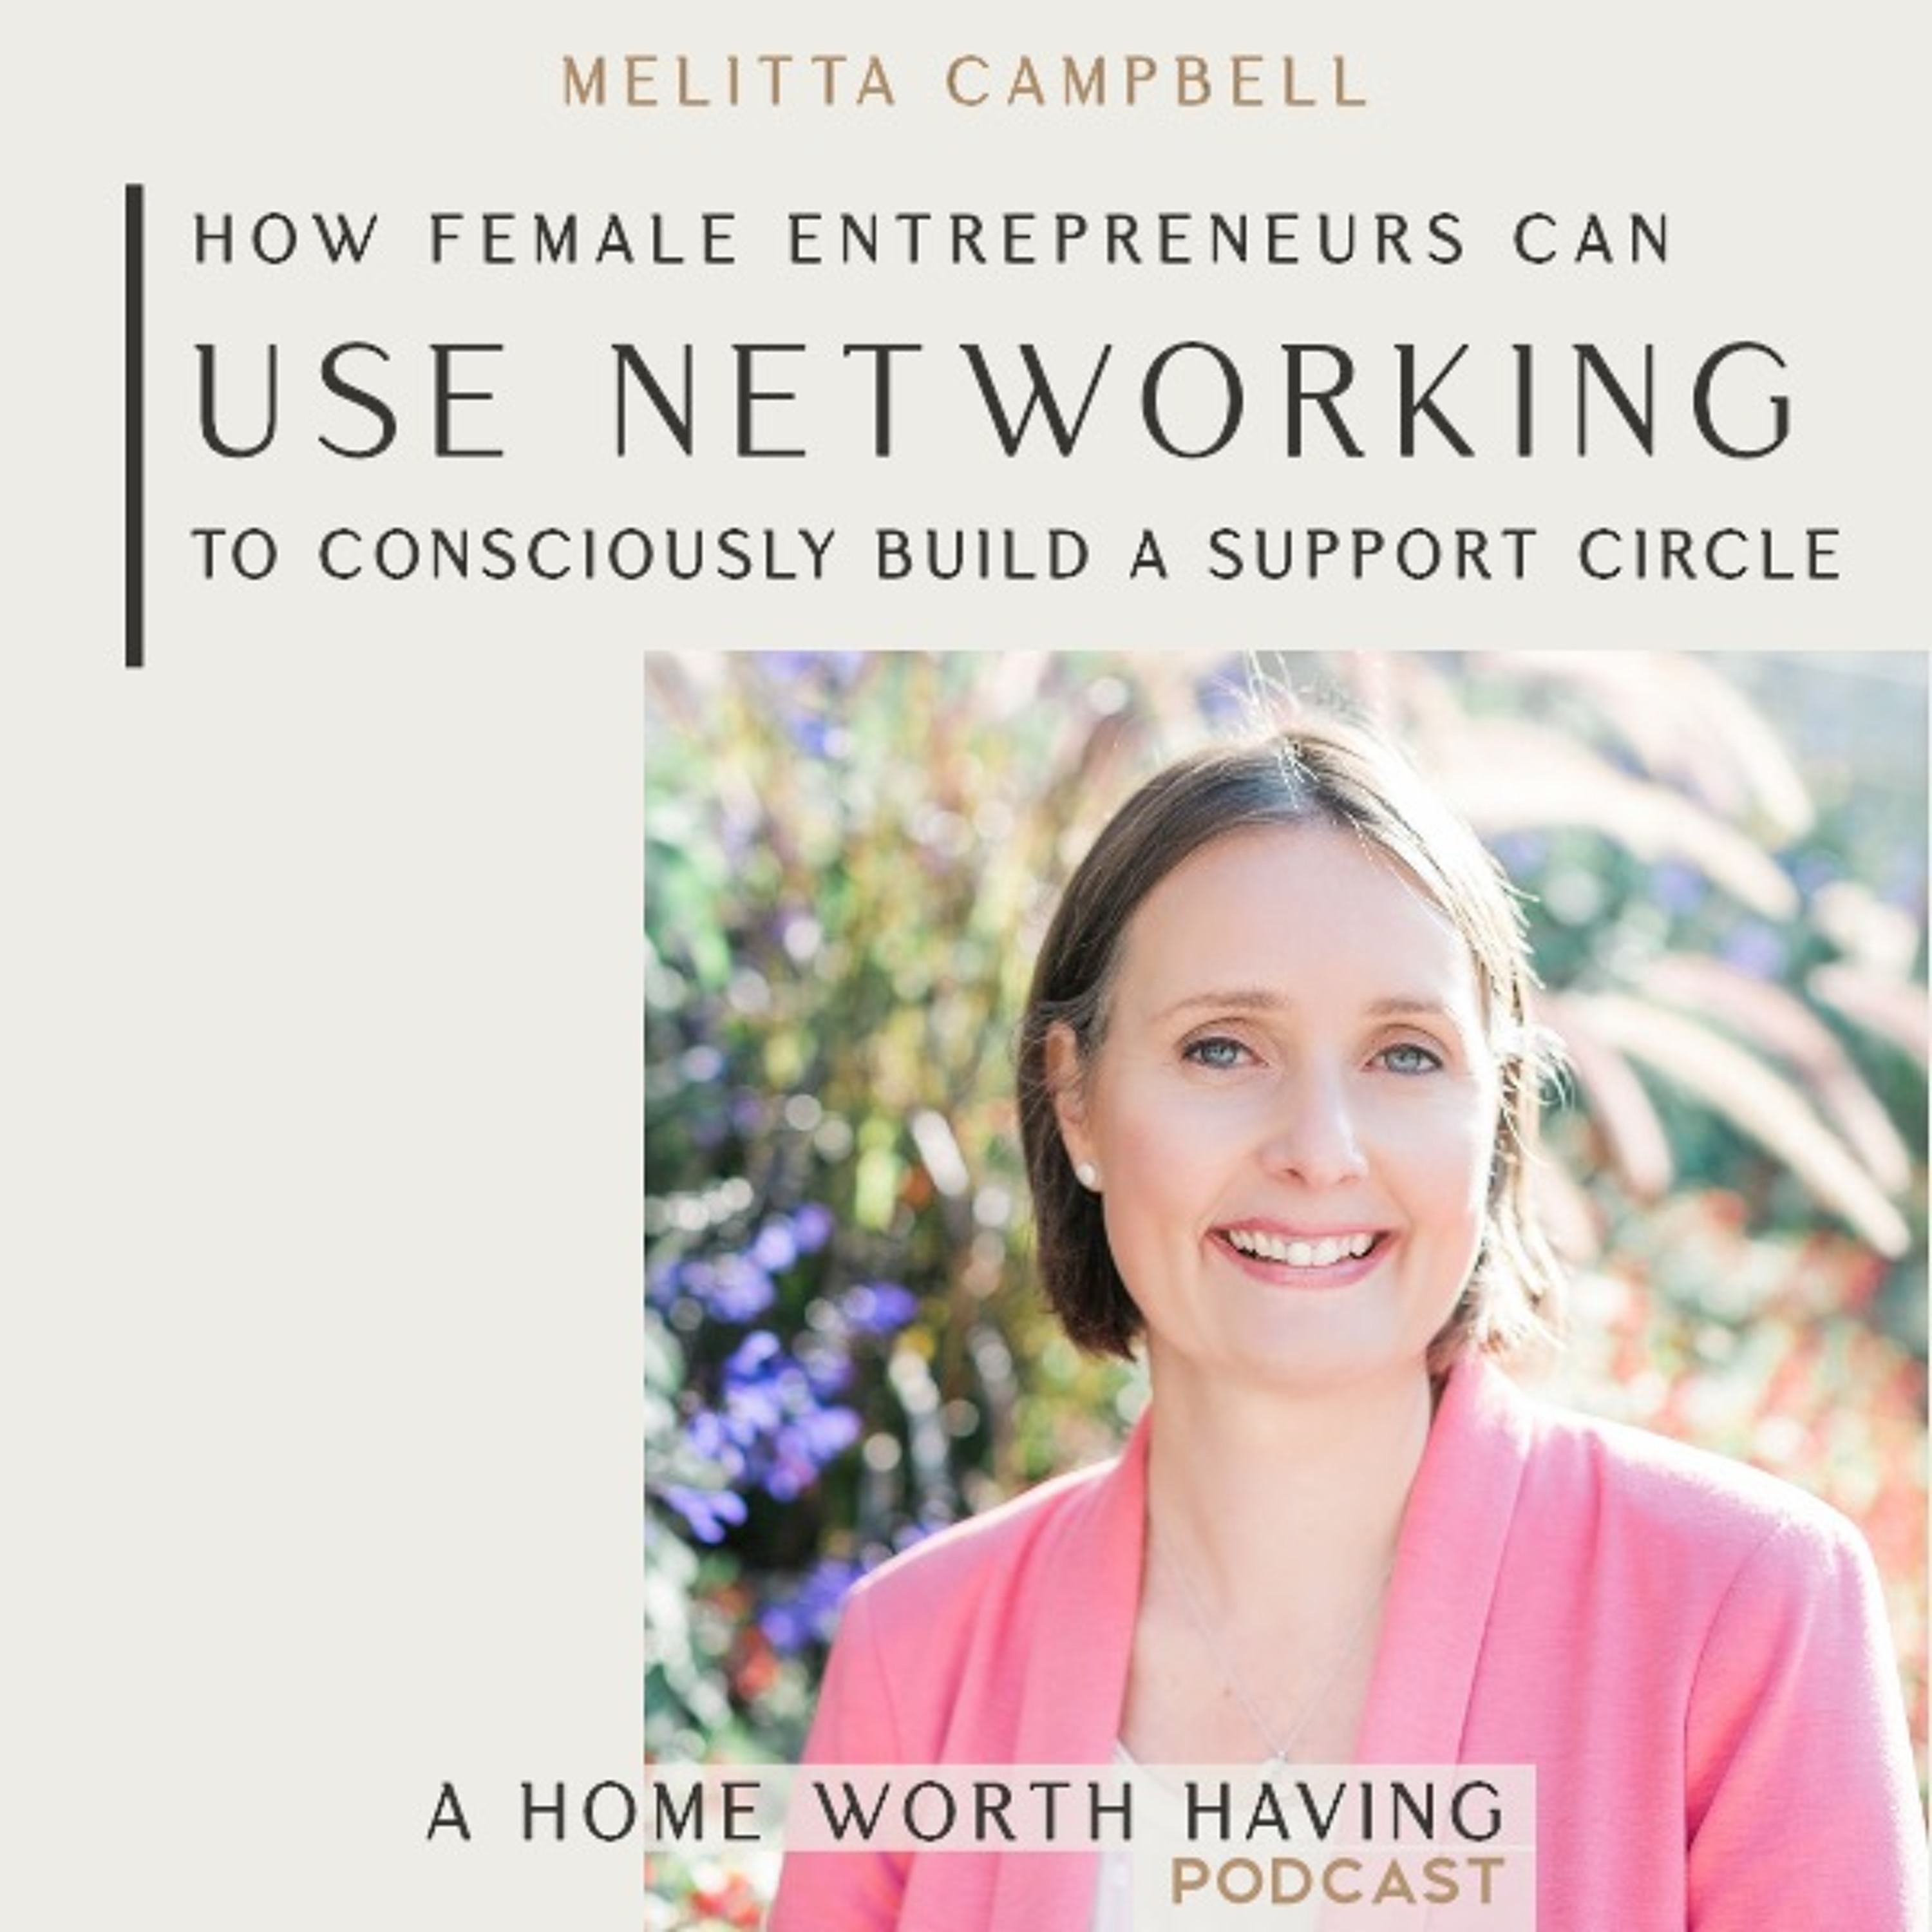 How female entrepreneurs can use networking to consciously build their support & success circle.